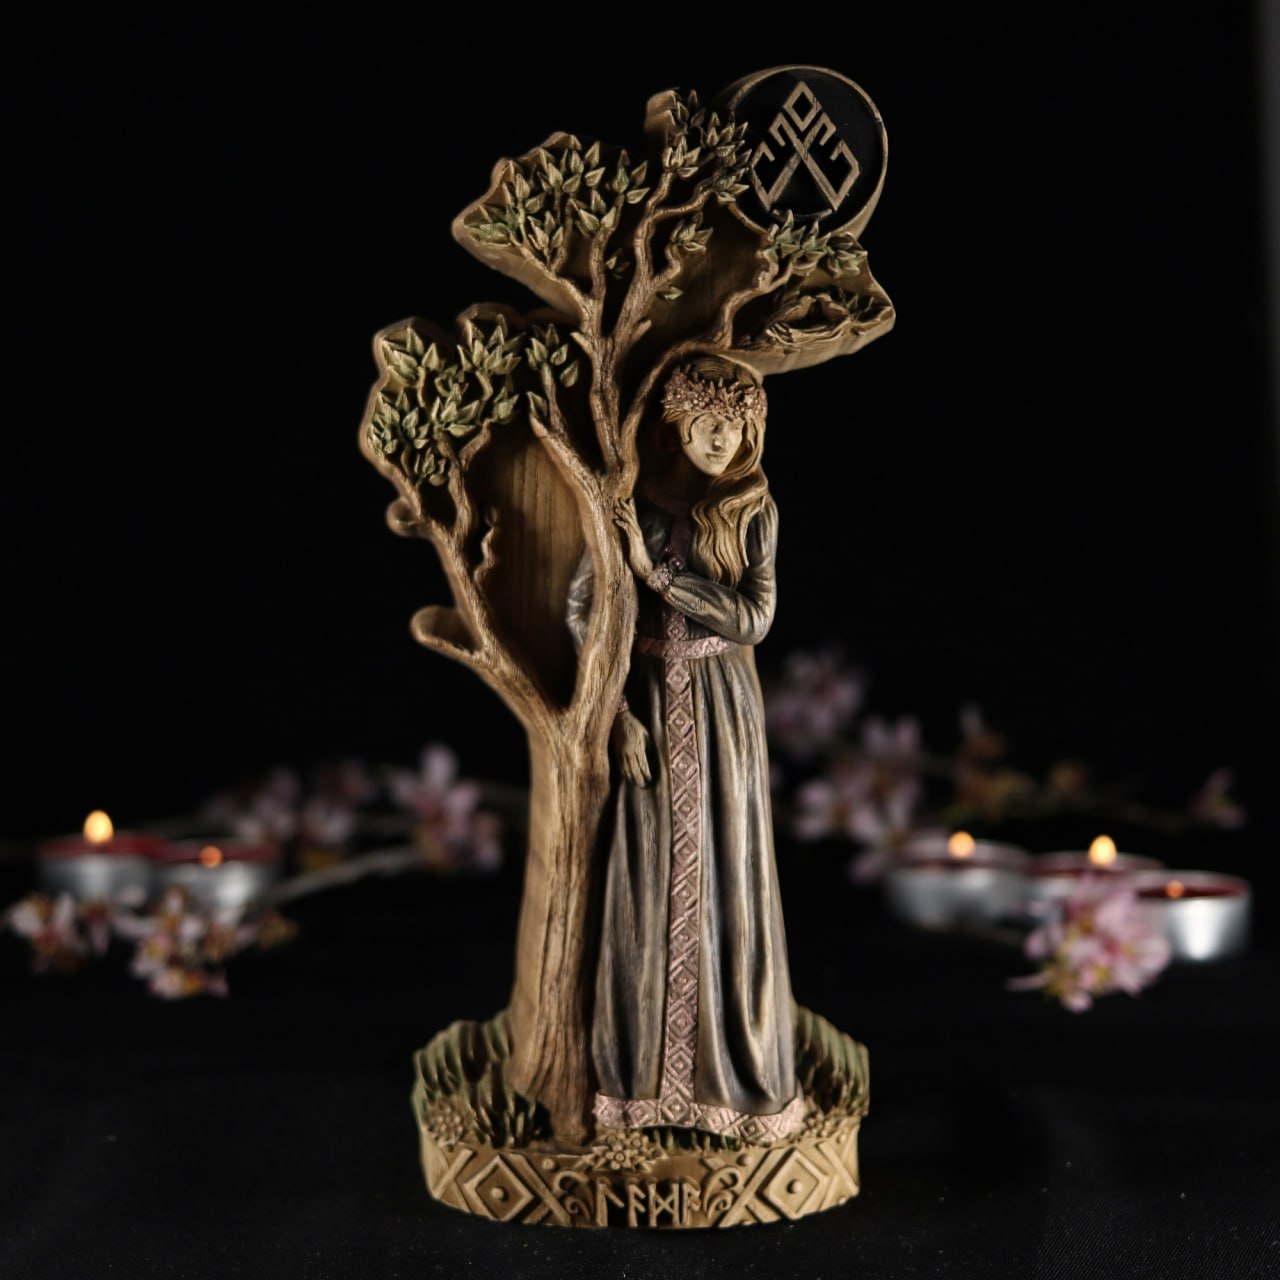 Lelya, Handcrafted Wood Sculpture for Spring and Beauty